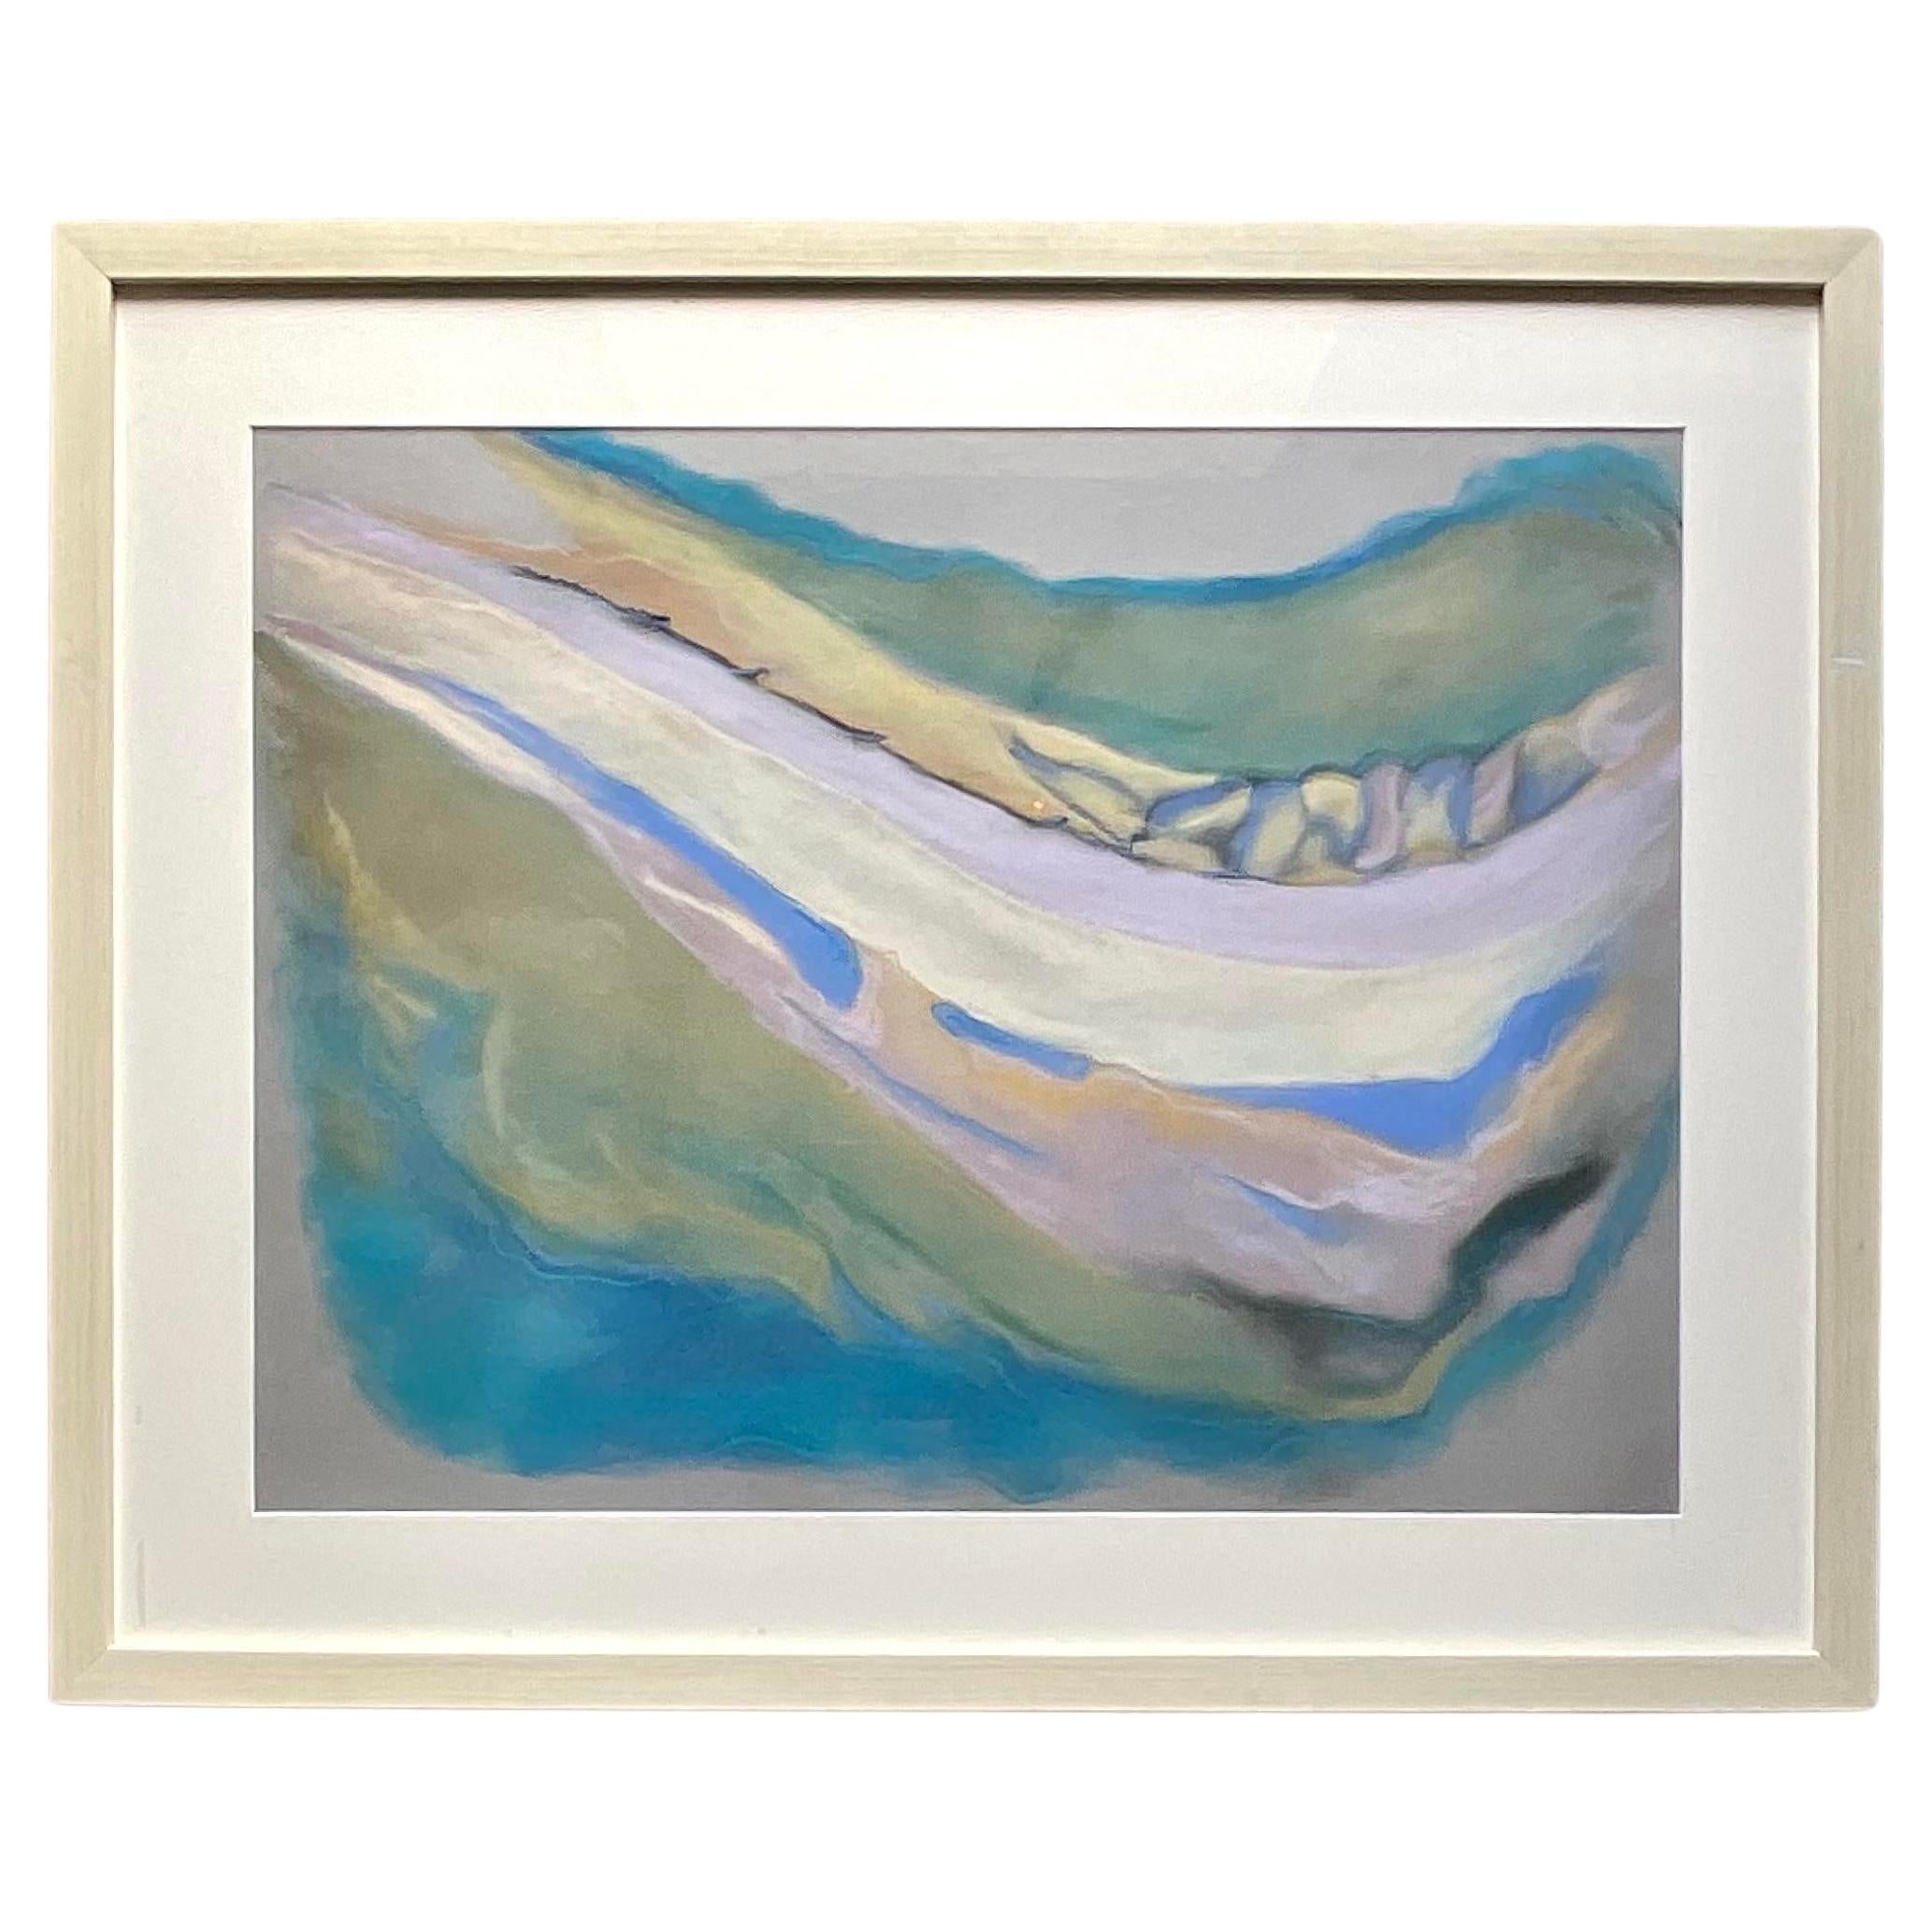 Vintage 1980s Signed Original Abstract Pastel on Paper Painting For Sale